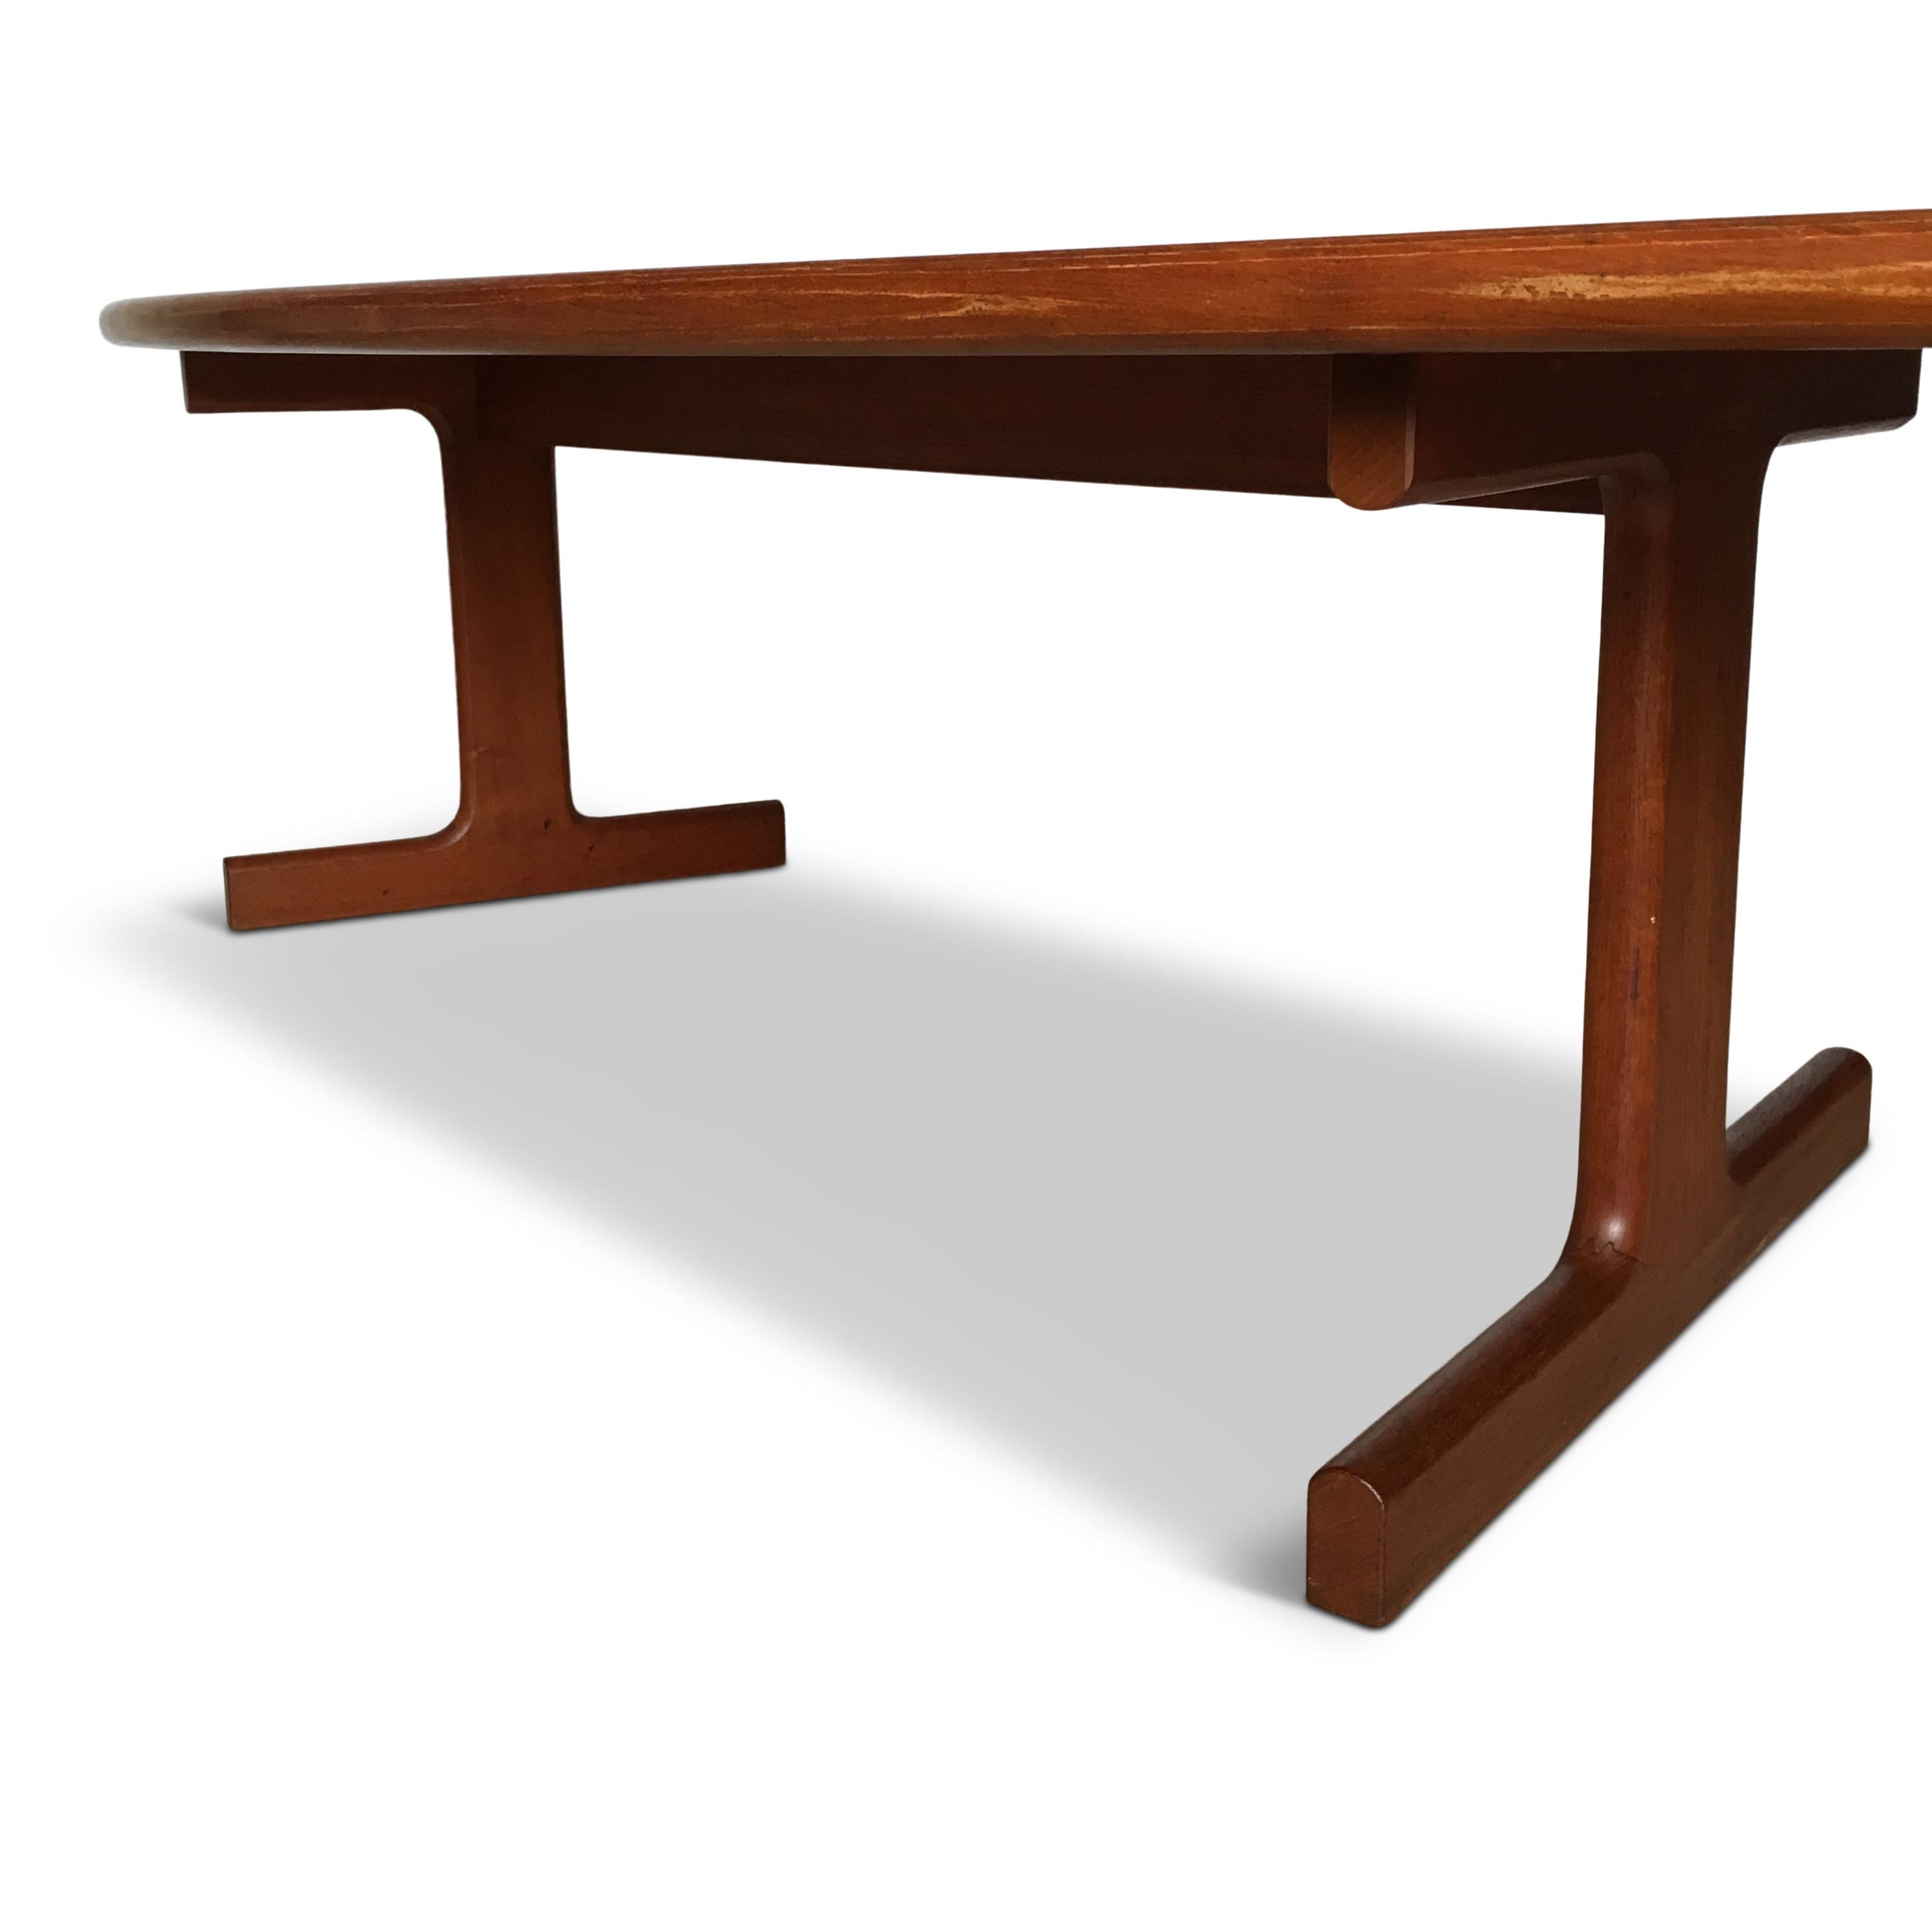 Midcentury Danish Teak Coffee Table with Curved Desk, 1950s For Sale 2